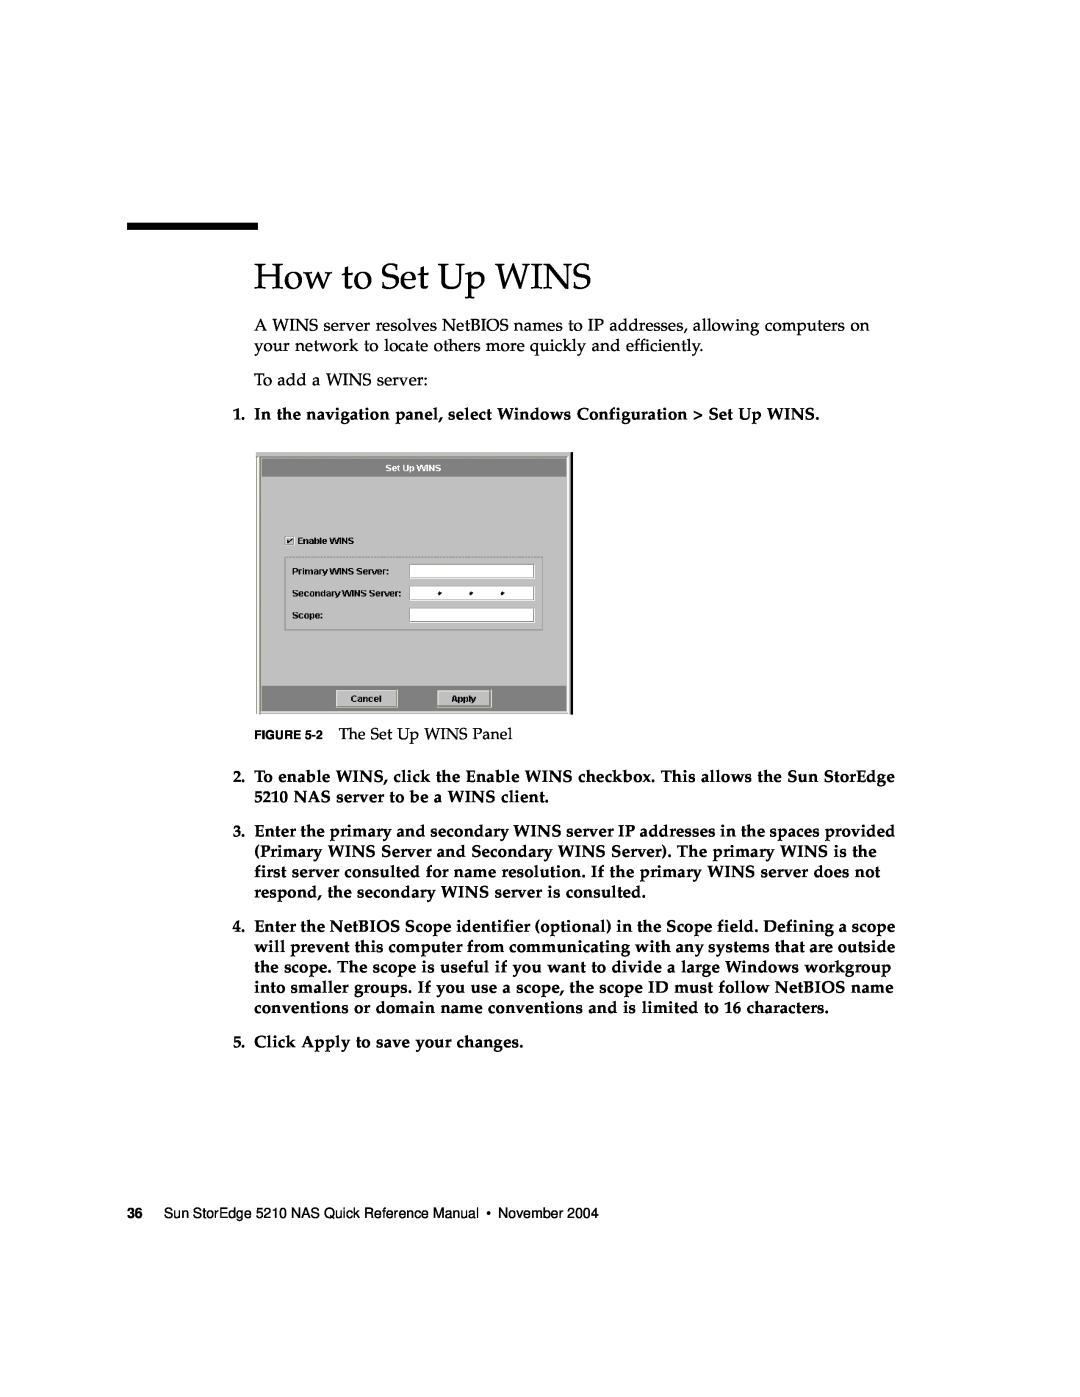 Sun Microsystems 5210 NAS manual How to Set Up WINS 